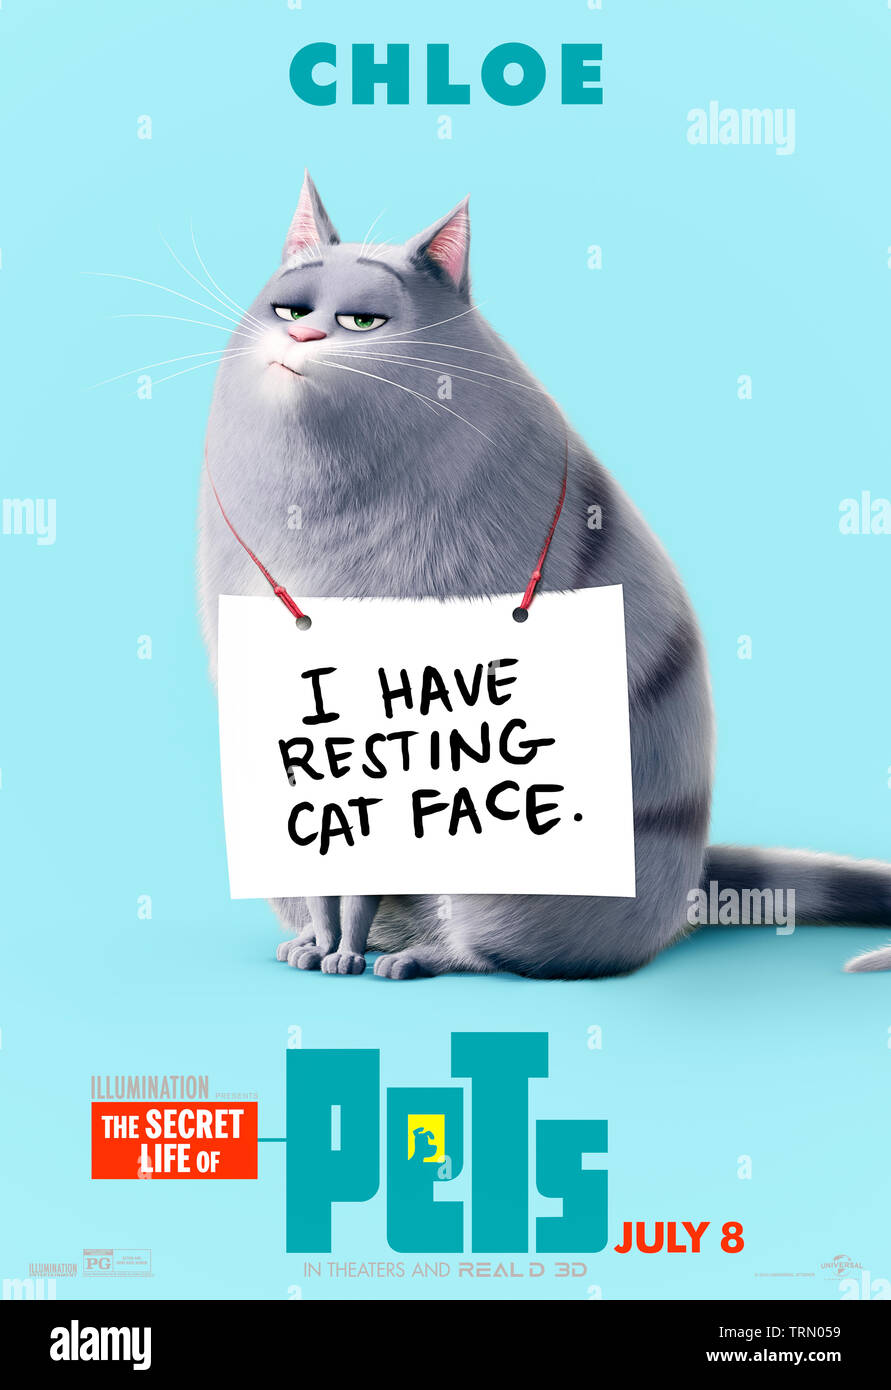 The Secret Life of Pets 2 (2019) directed by Chris Renaud and Jonathan del Val and starring Chloe voiced by Lake Bell. Animated sequel about what pets get up to whilst their owners are out for the day. Stock Photo